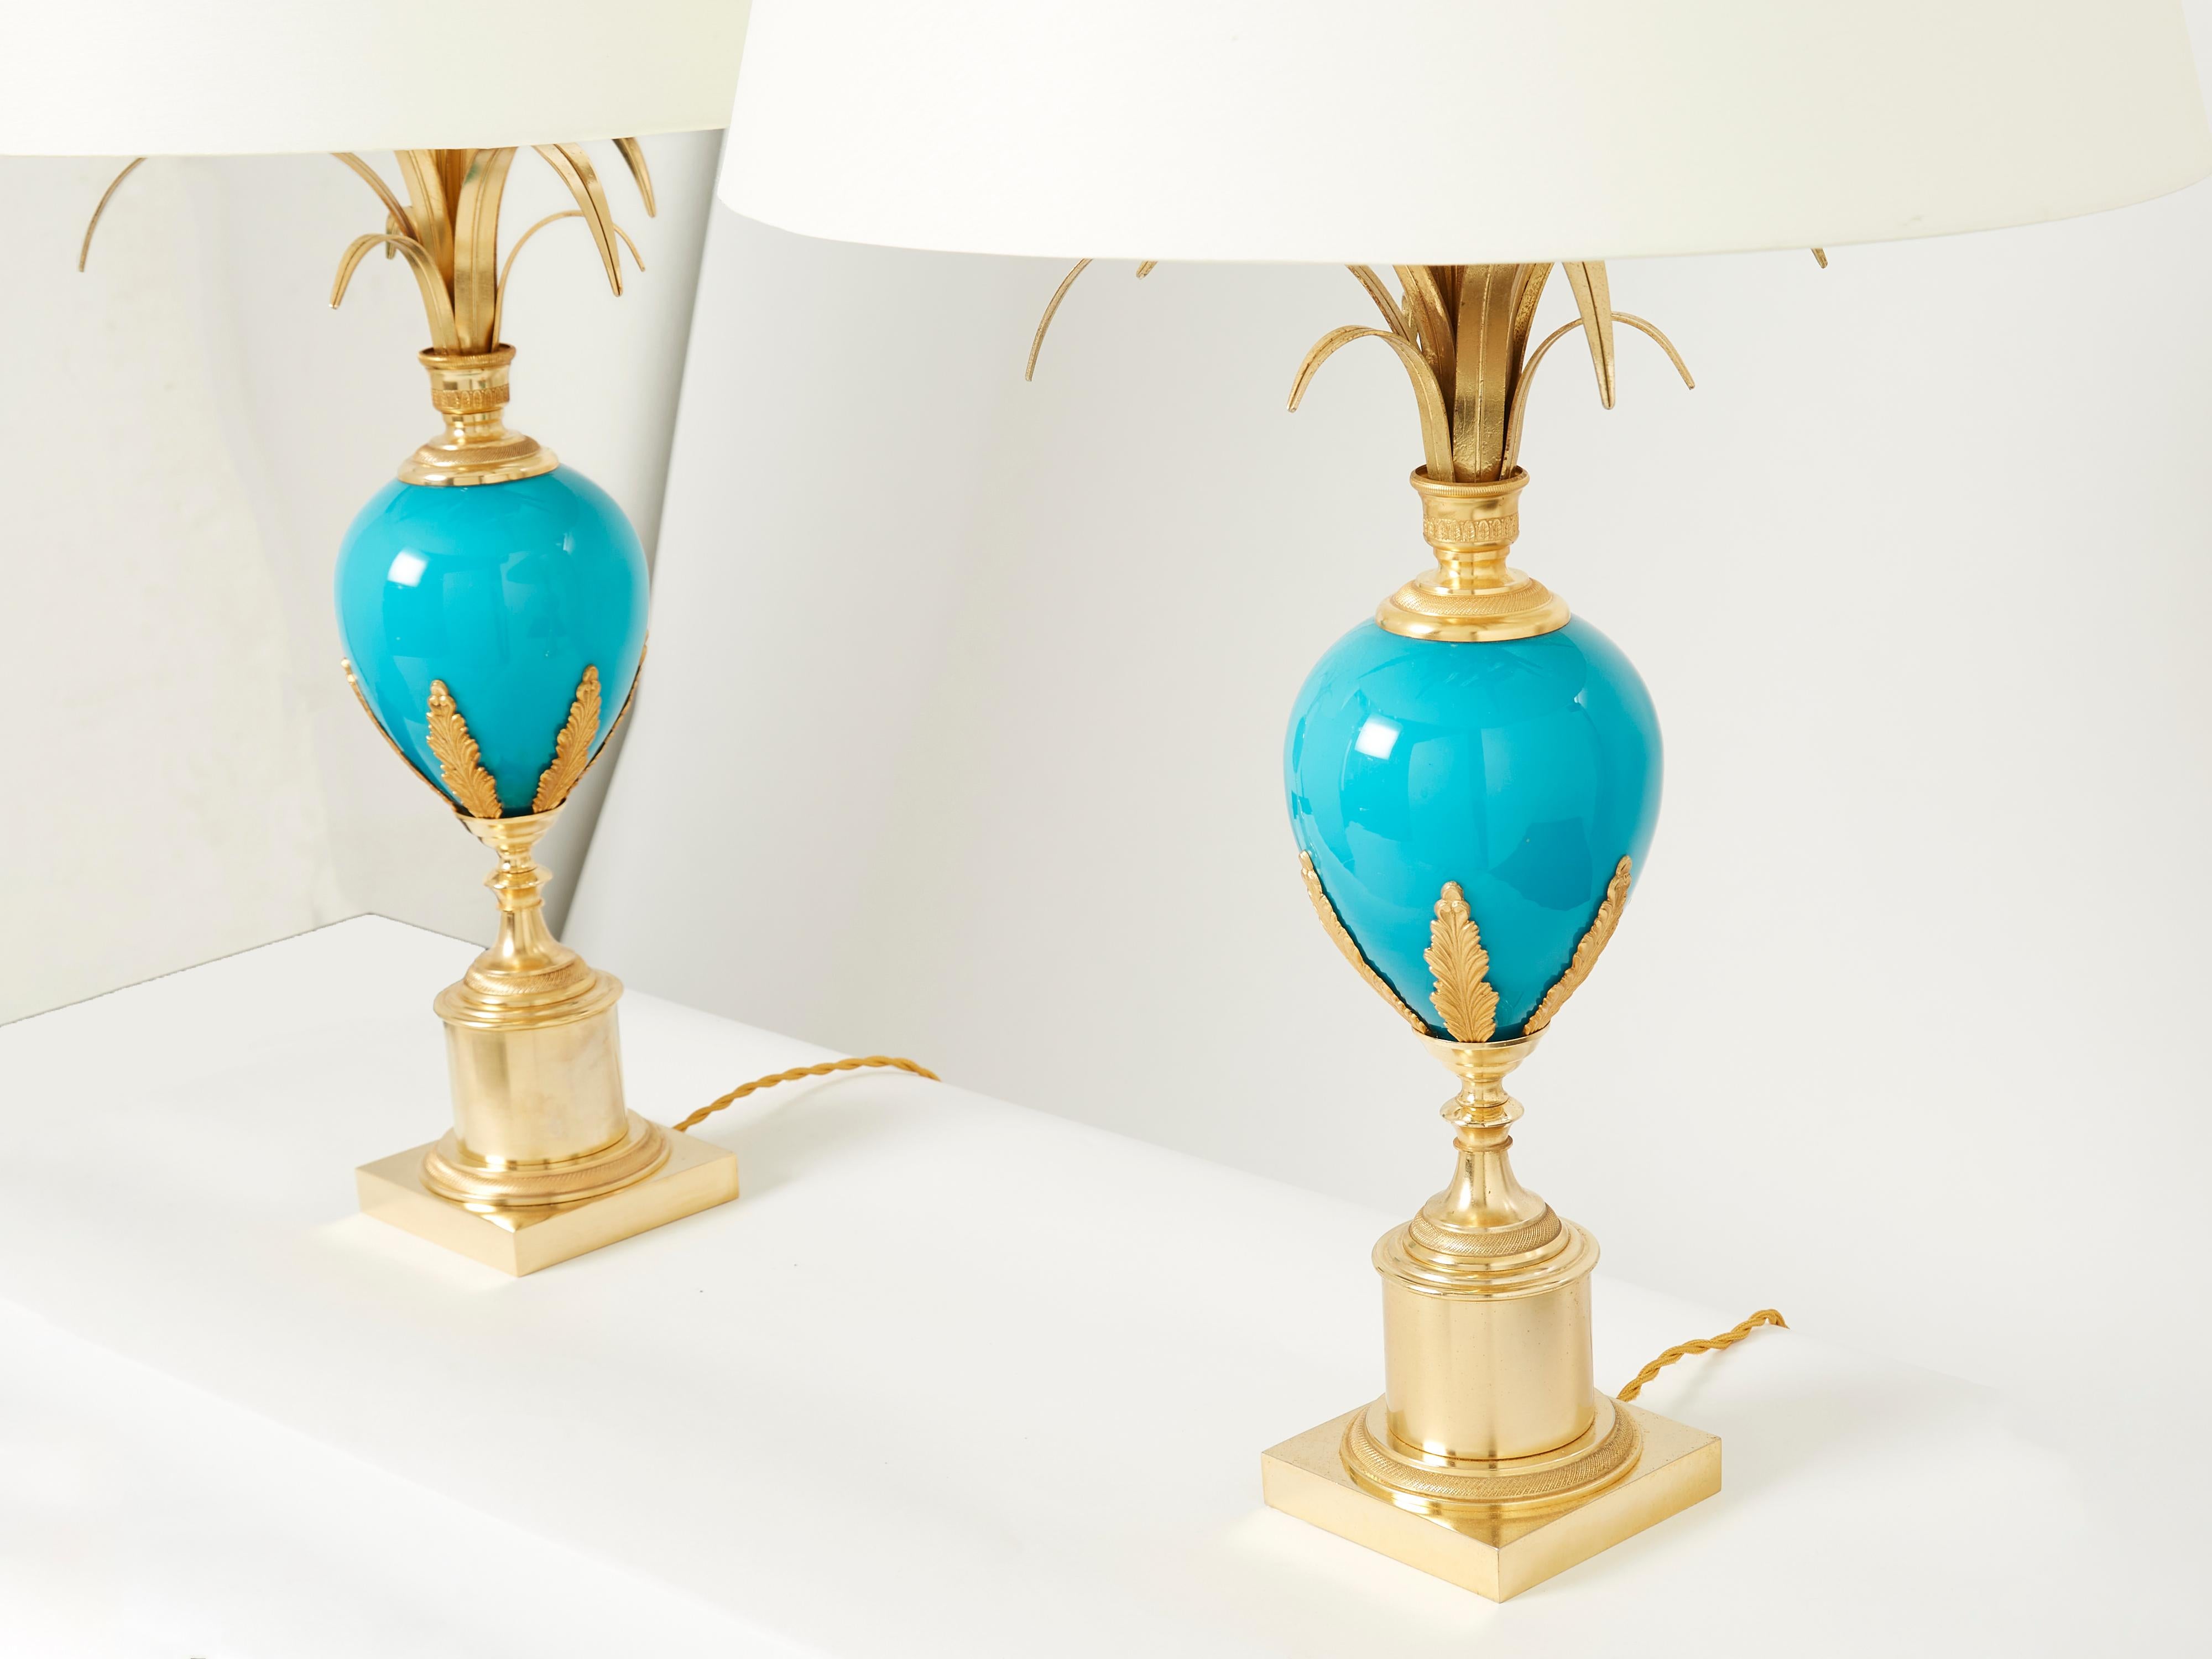 Vintage Maison Charles table lamps use nature as a muse, and this beautiful pair of lamps is a perfect example. They feature a beautiful brass base combined with a striking blue opaline ostrich egg in its center. Topped with made on order off-white